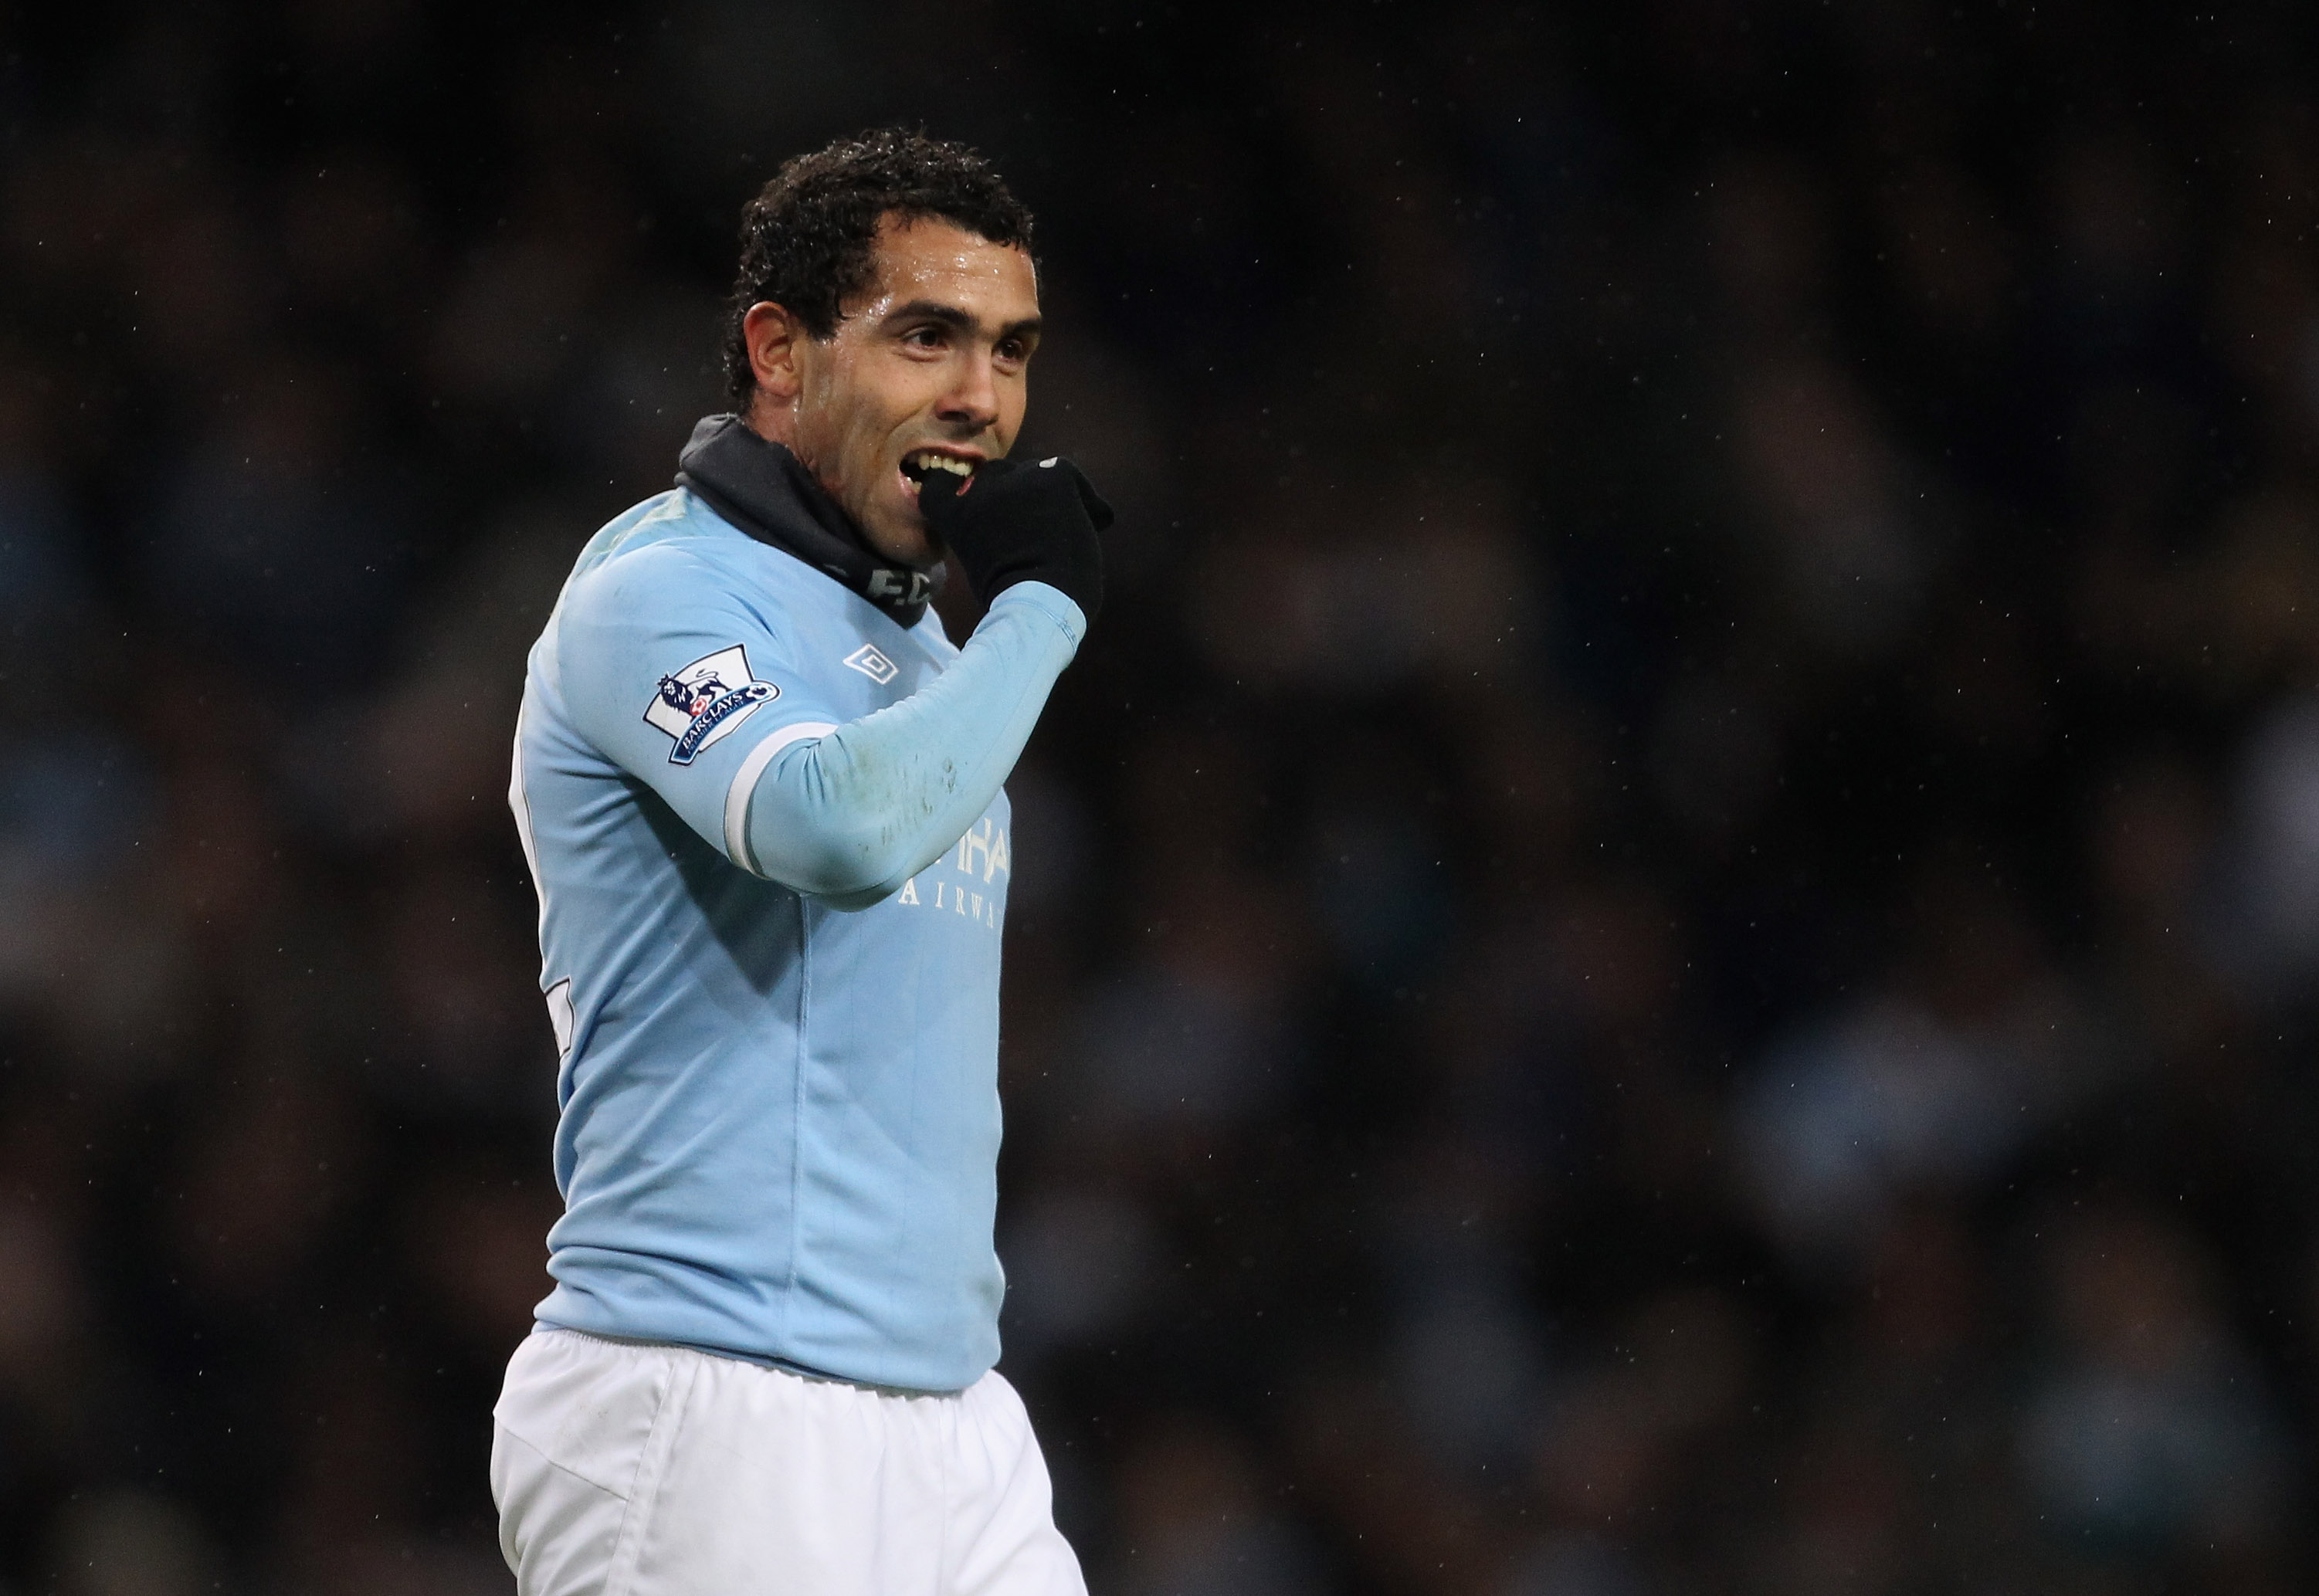 MANCHESTER, ENGLAND - JANUARY 01:  Carlos Tevez of Manchester City looks on after missing a goalscoring chance during the Barclays Premier League match between Manchester City and Blackpool at the City of Manchester Stadium on January 1, 2011 in Mancheste